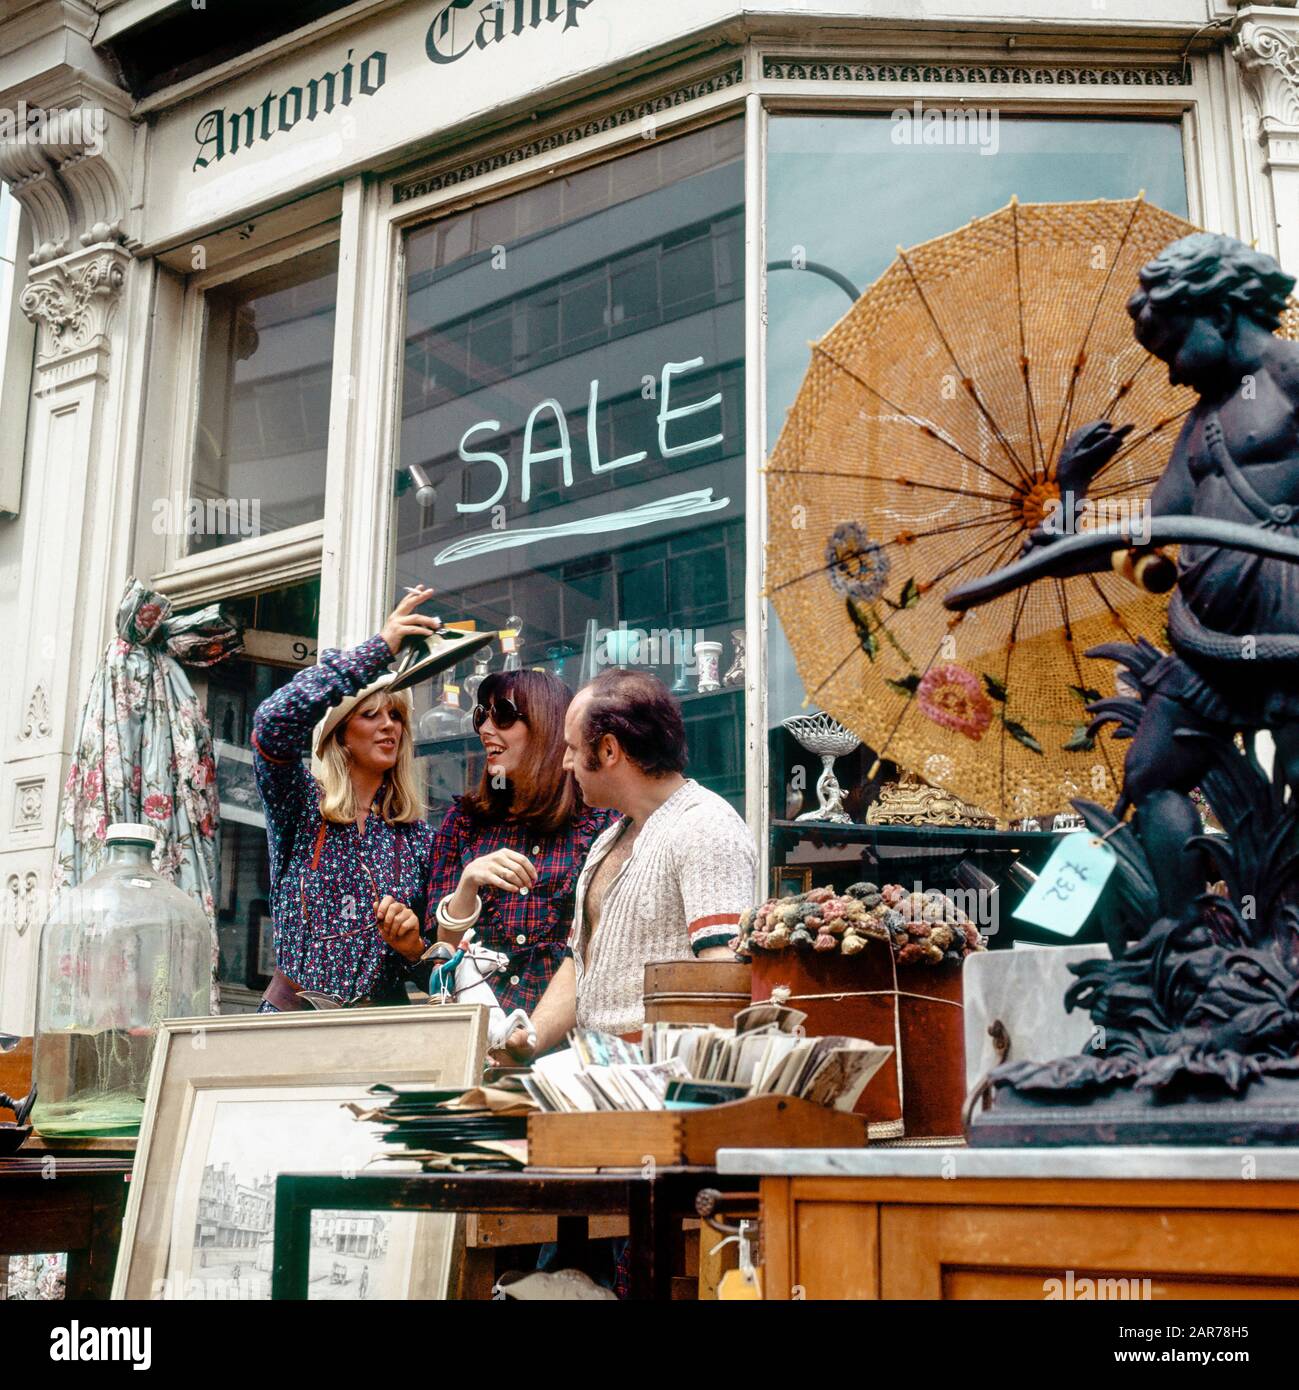 London 1970s, two women having fun with merchant while shopping at antiques store, Kensington, England, UK, GB, Great Britain, Stock Photo